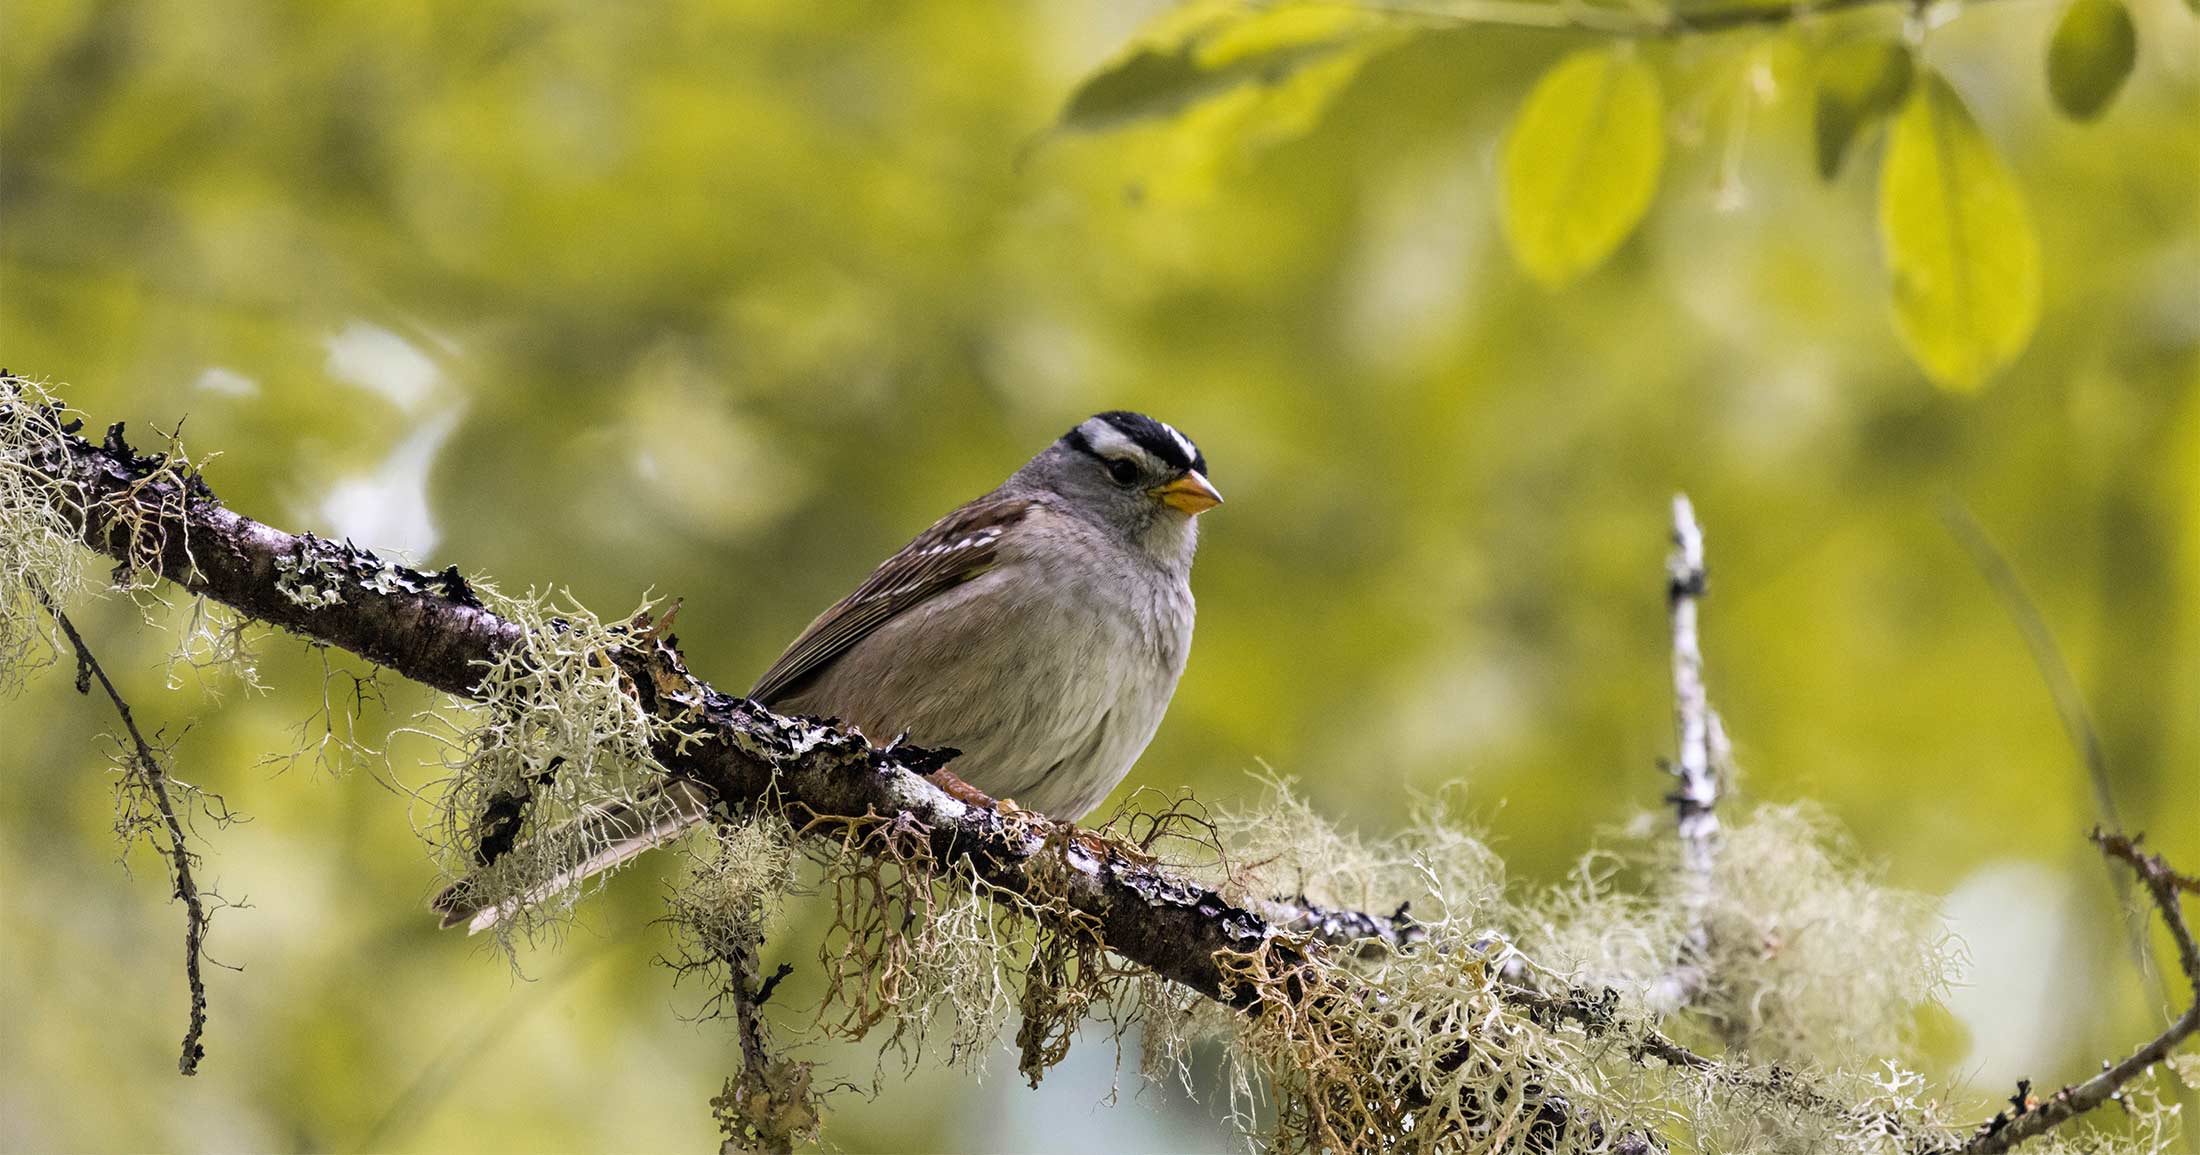 White crowned sparrow sitting on a branch.